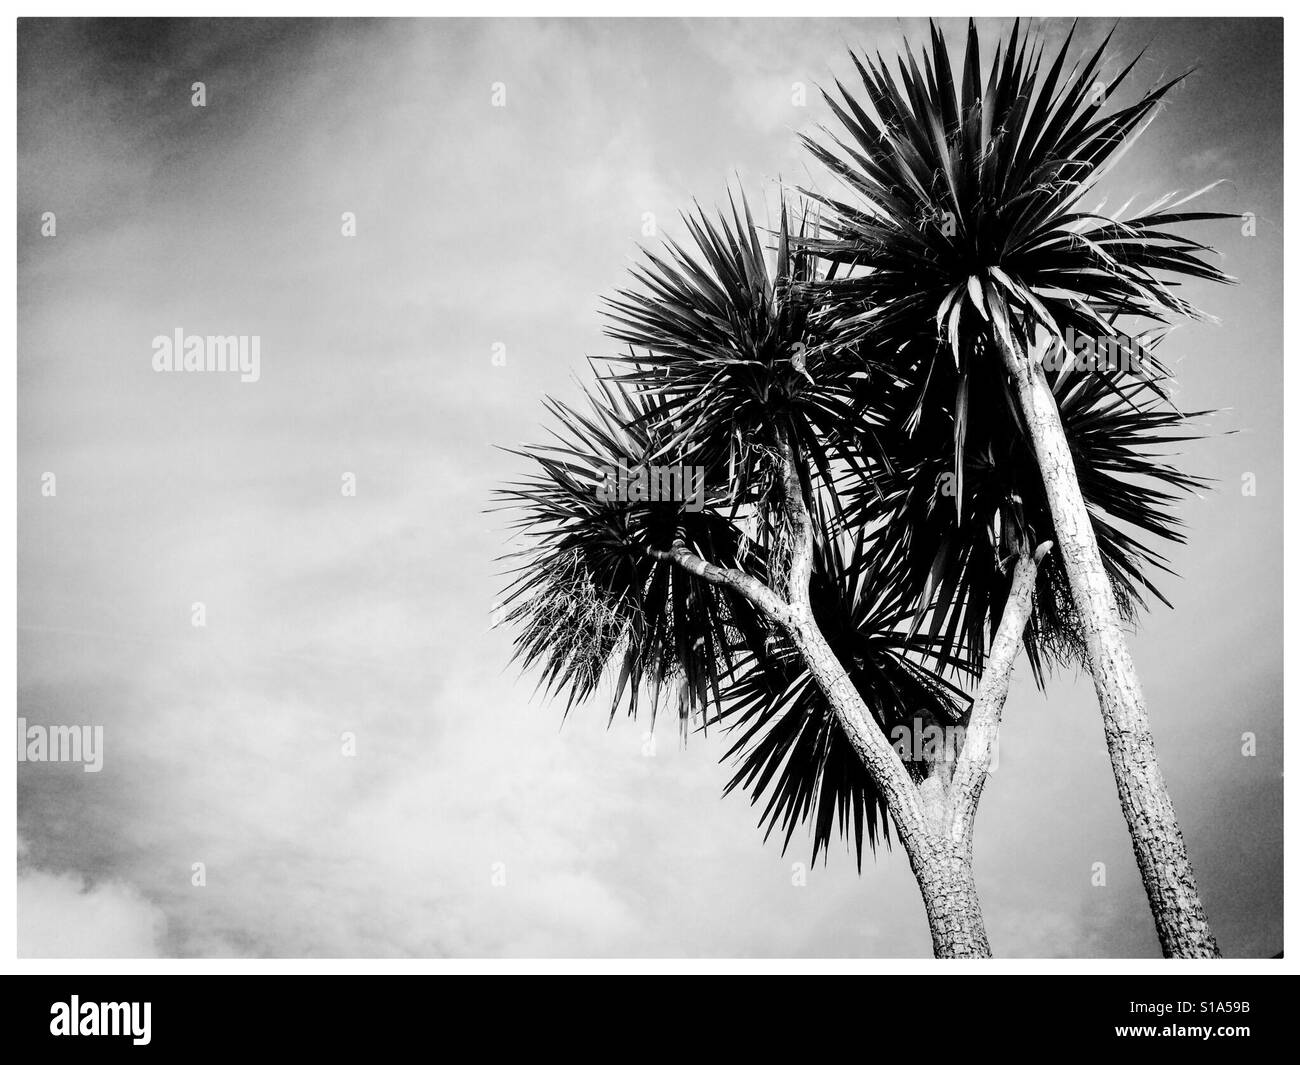 Black and white photograph of palm trees against the sky Stock Photo